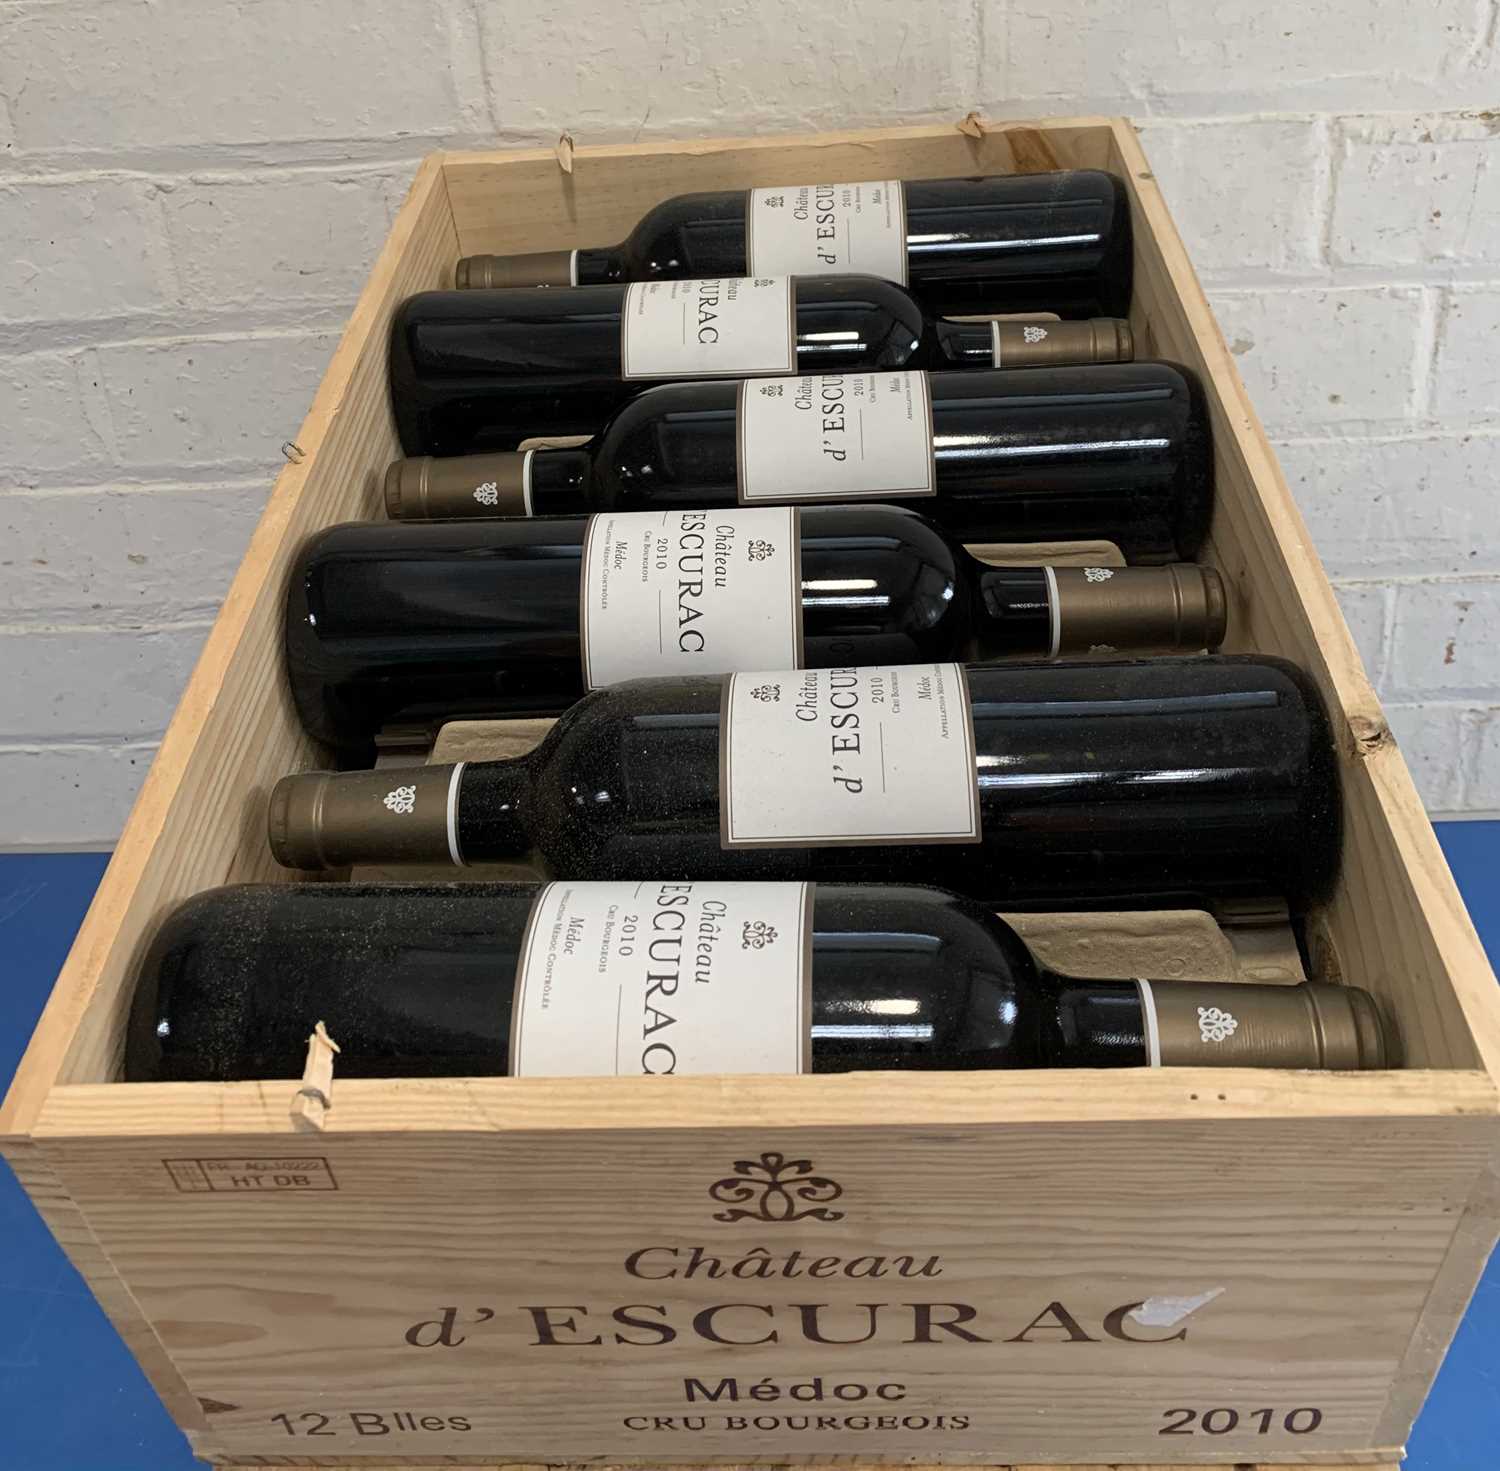 Lot 12 - 12 Bottles (in OWC) Chateau d’Escurac Cru Bourgeois Medoc 2010